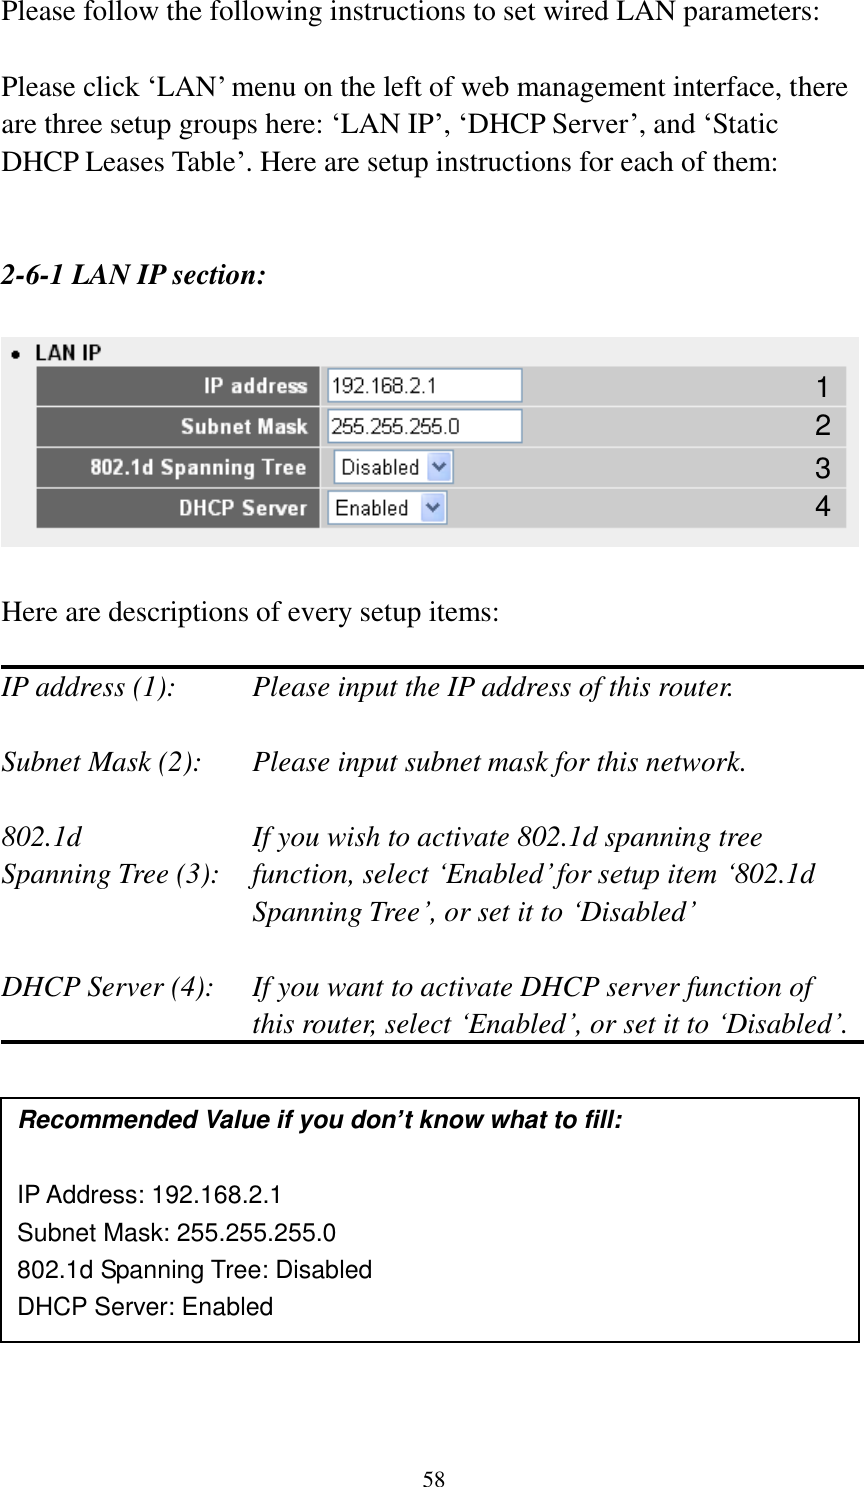 58 Please follow the following instructions to set wired LAN parameters:  Please click „LAN‟ menu on the left of web management interface, there are three setup groups here: „LAN IP‟, „DHCP Server‟, and „Static DHCP Leases Table‟. Here are setup instructions for each of them:   2-6-1 LAN IP section:    Here are descriptions of every setup items:  IP address (1):     Please input the IP address of this router.  Subnet Mask (2):    Please input subnet mask for this network.  802.1d         If you wish to activate 802.1d spanning tree Spanning Tree (3):    function, select „Enabled‟ for setup item „802.1d Spanning Tree‟, or set it to „Disabled‟  DHCP Server (4):  If you want to activate DHCP server function of this router, select „Enabled‟, or set it to „Disabled‟.             Recommended Value if you don’t know what to fill:  IP Address: 192.168.2.1 Subnet Mask: 255.255.255.0 802.1d Spanning Tree: Disabled DHCP Server: Enabled 1 3 2 4 